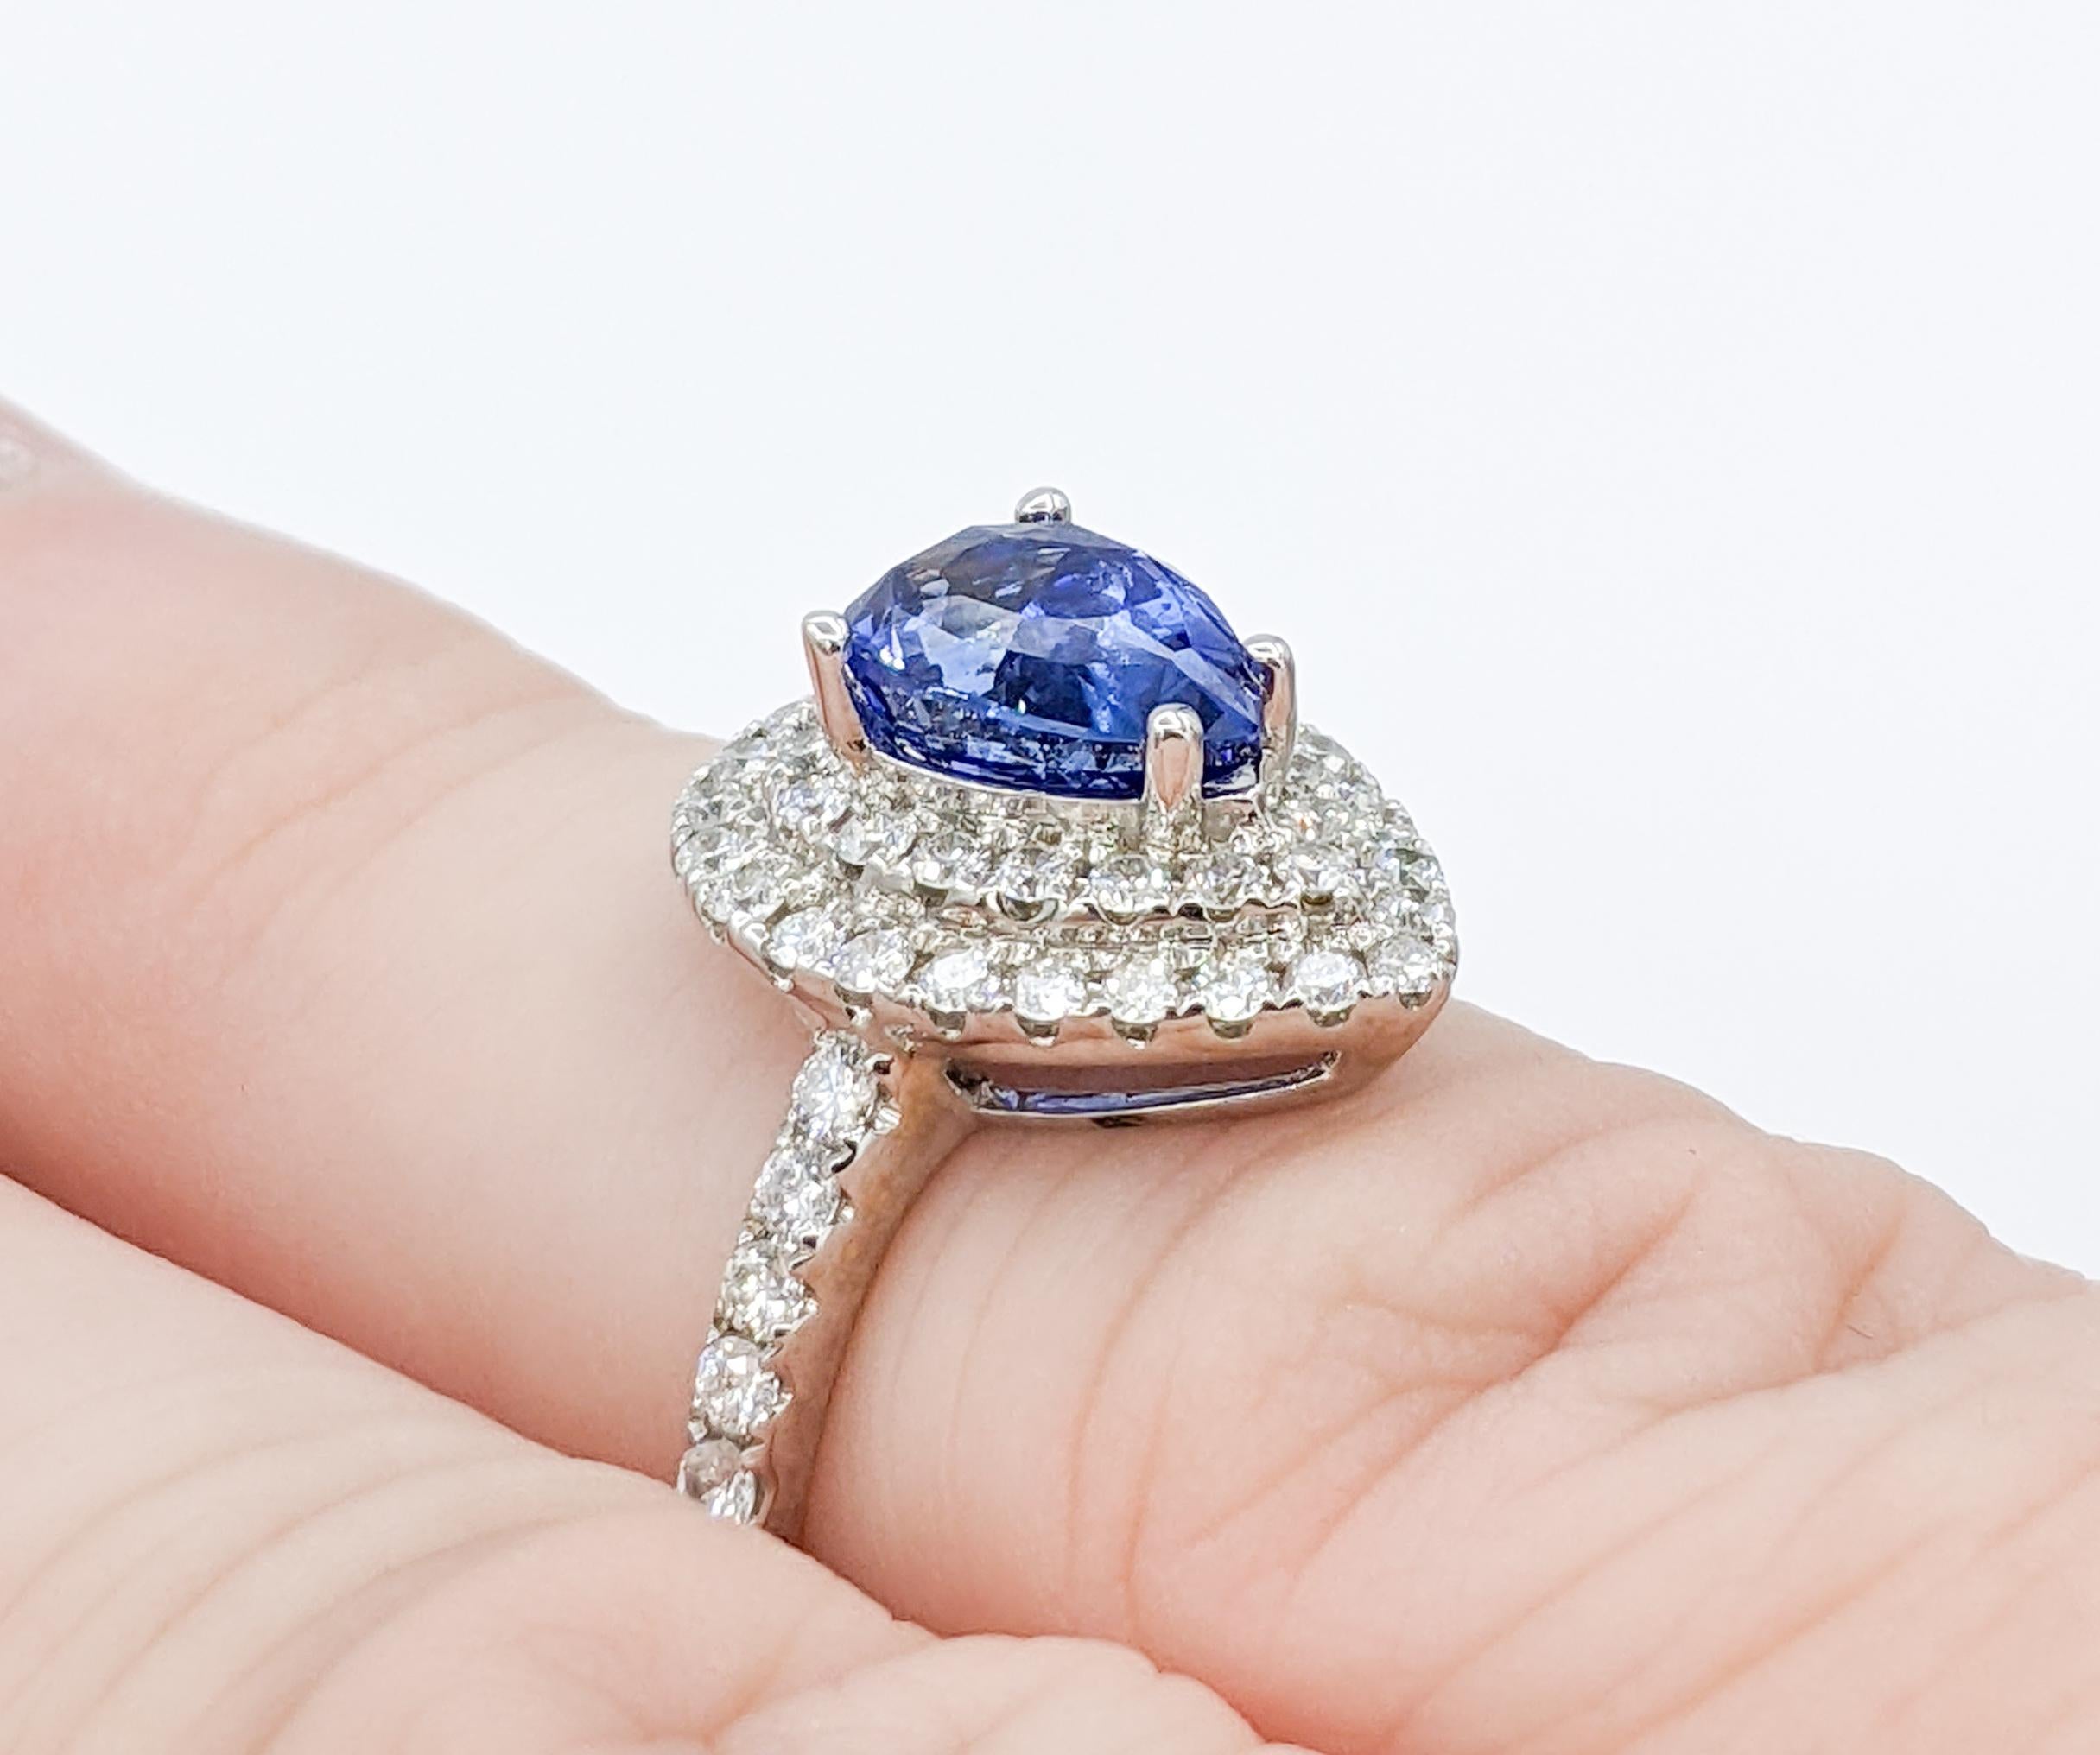 Stunning 2.00ct Sapphire & Diamond Cocktail Ring - 18K White Gold In Excellent Condition For Sale In Bloomington, MN